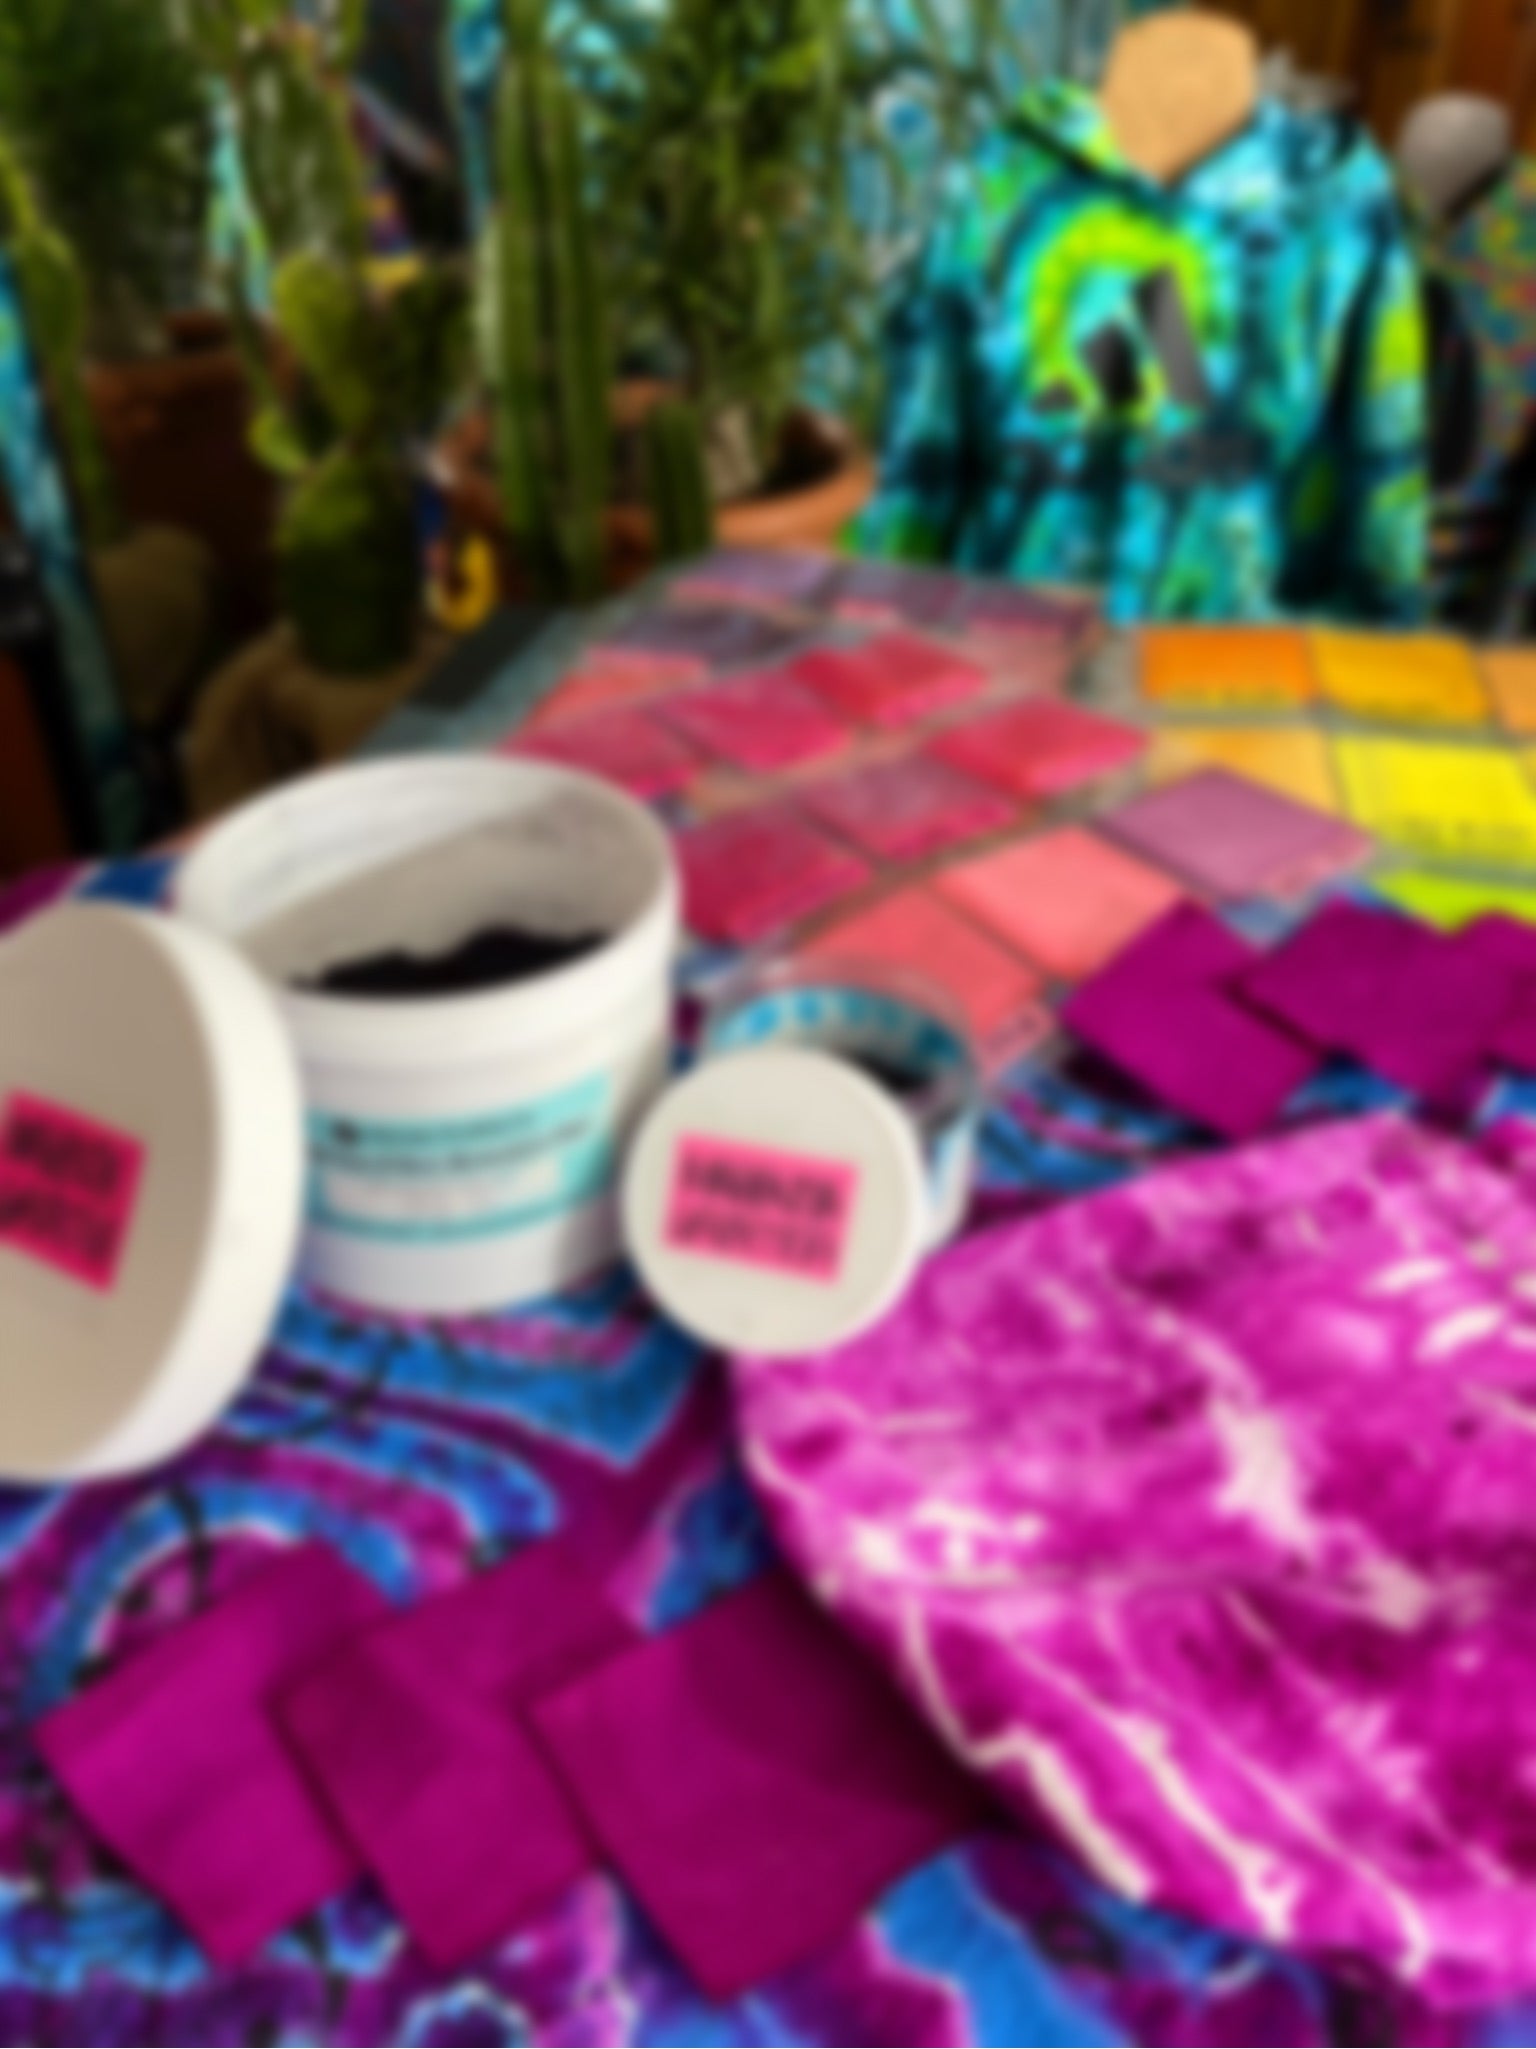 Slightly blurred image featuring Magenta Galactica dye powder as well as tie dye and ice dyed fabric sample swatches of the new fiber reactive dye color